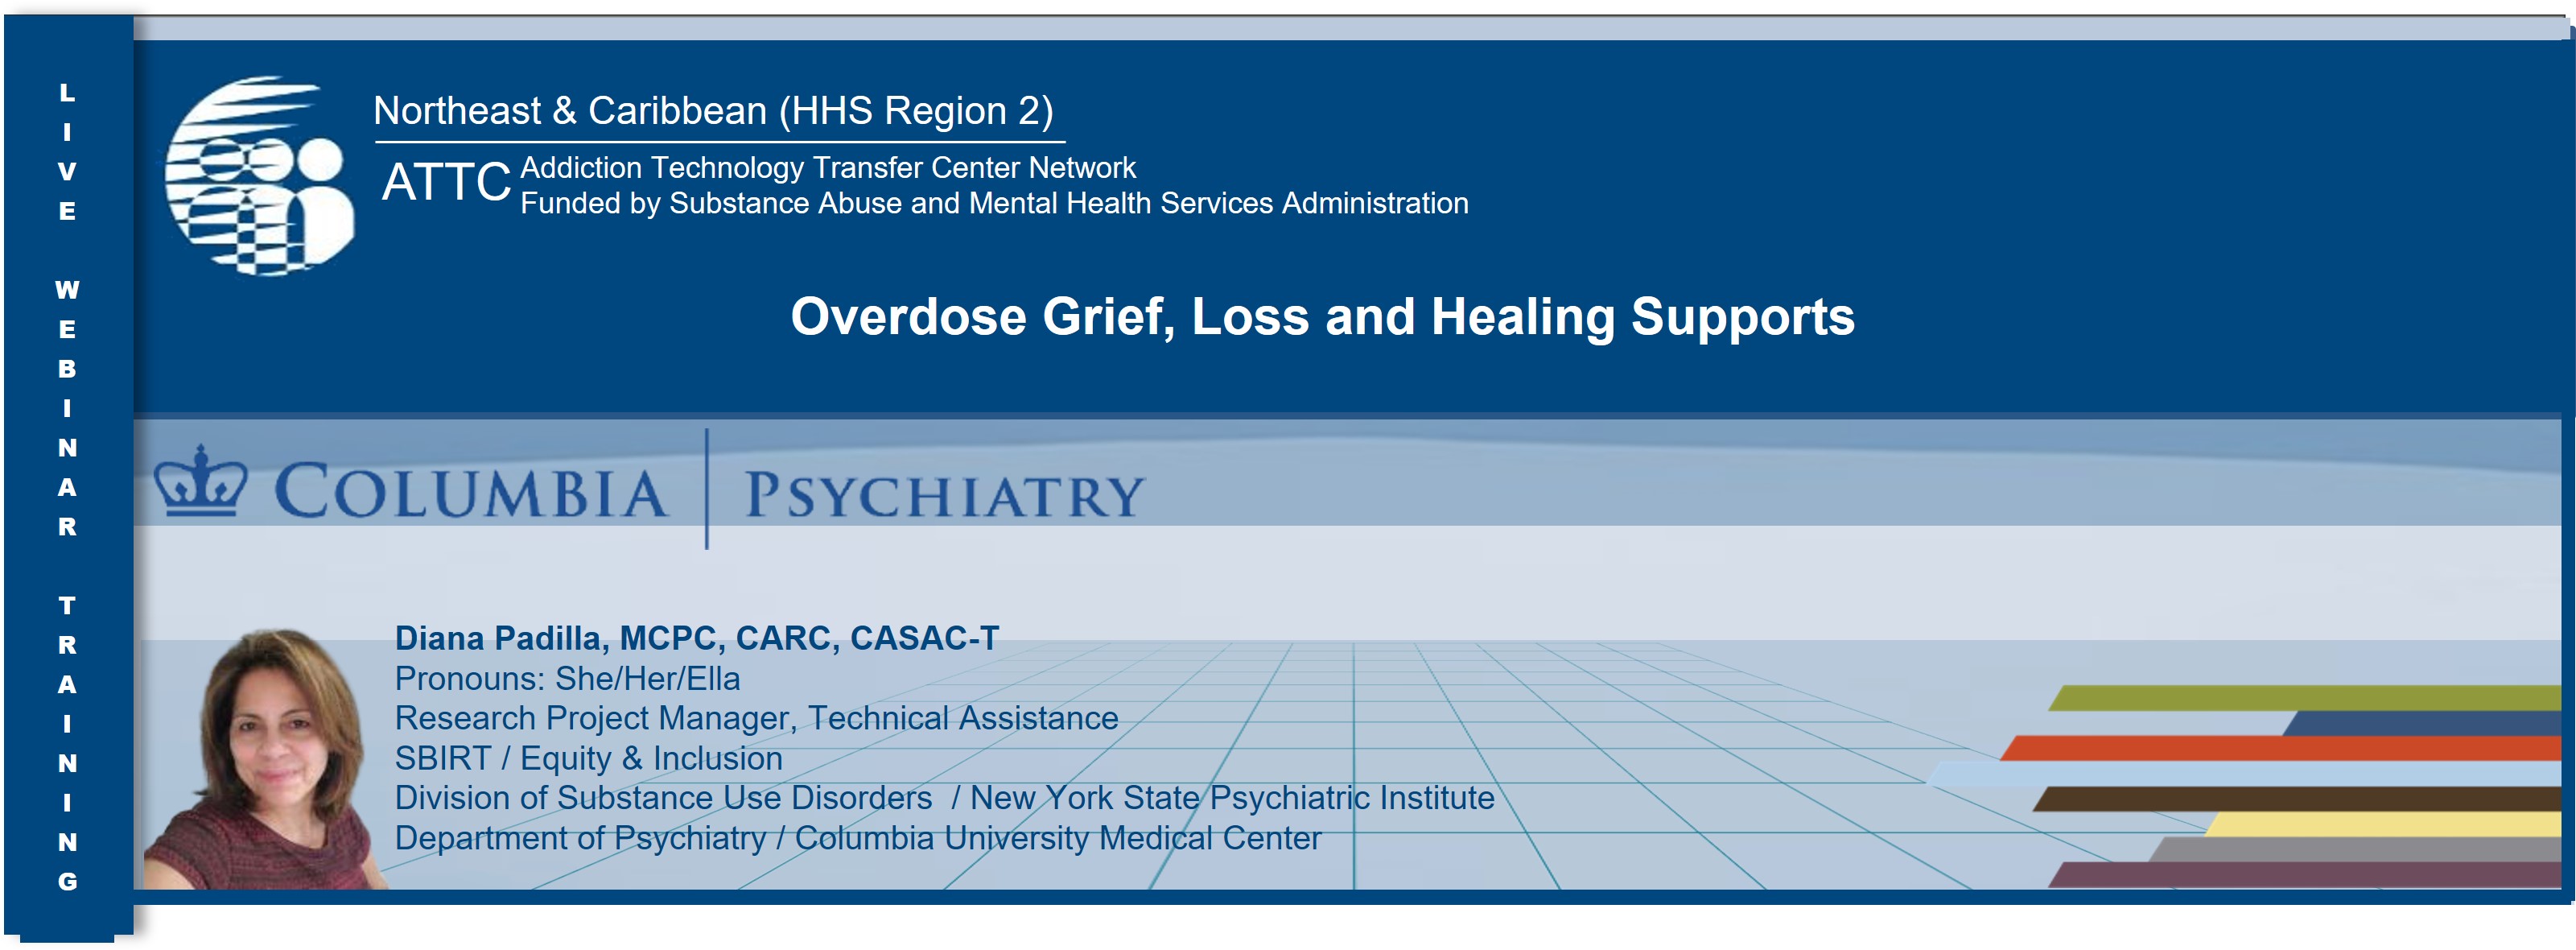 Title: Overdose Grief, Loss, and Healing Supports